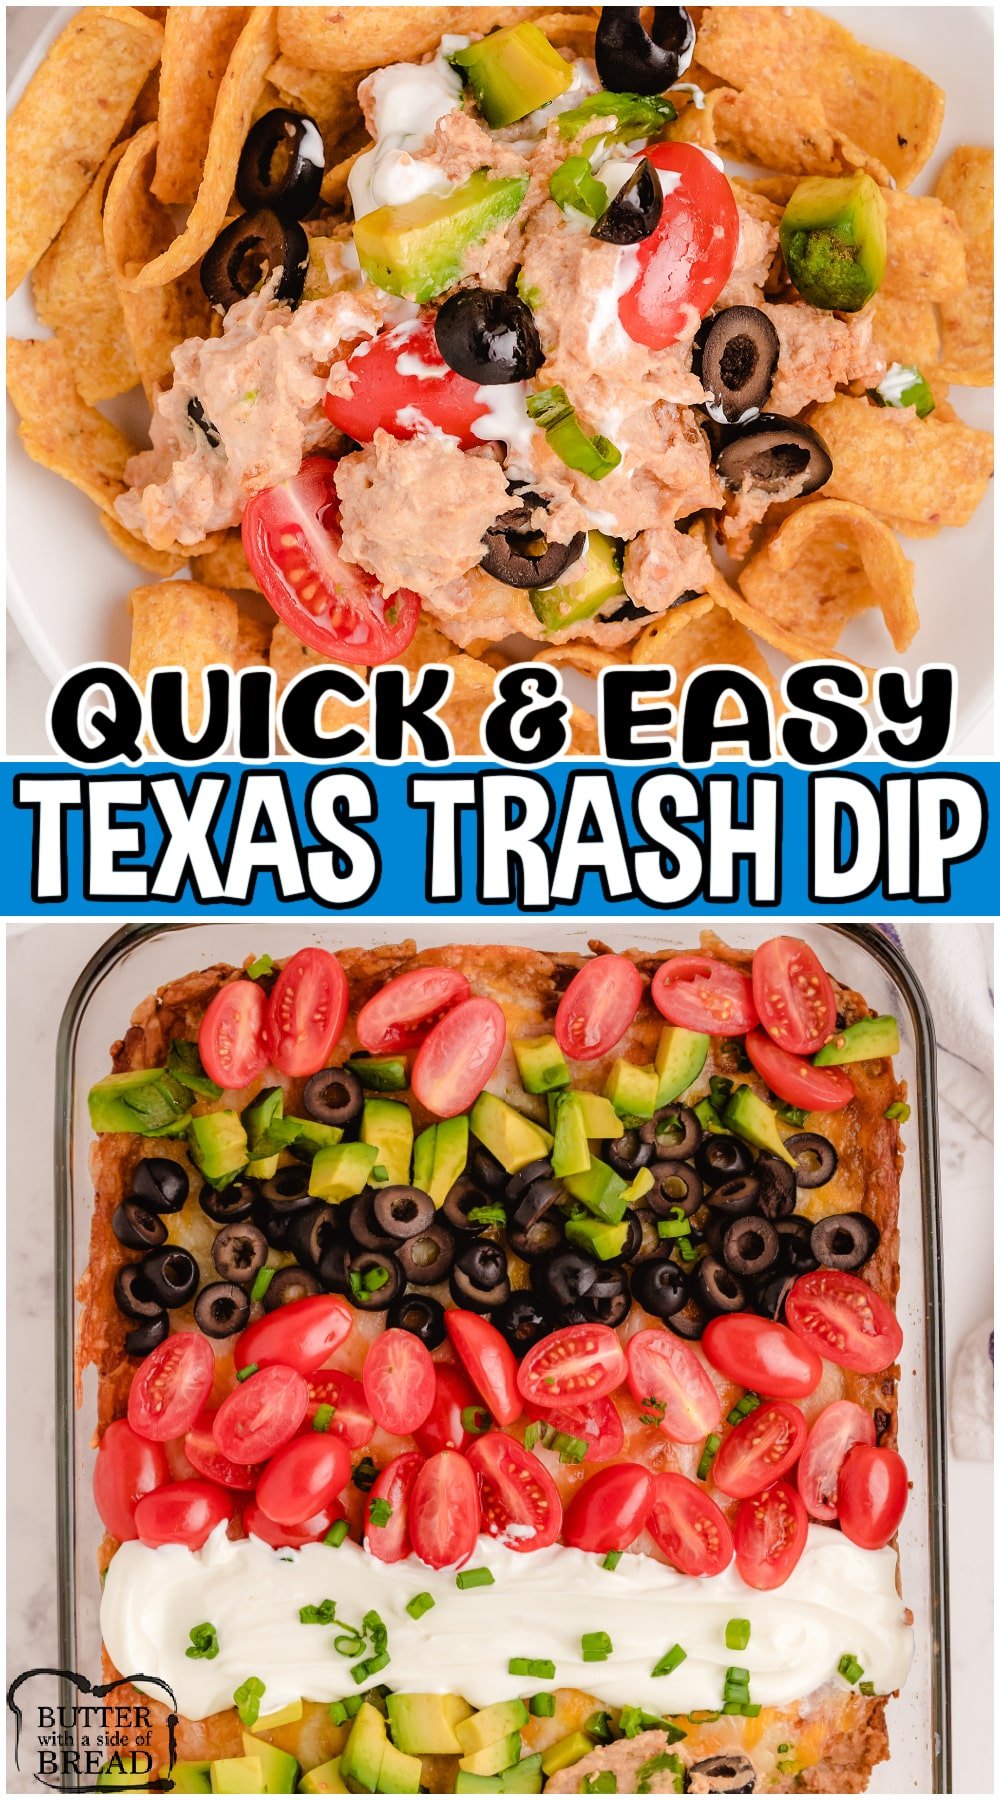 Texas Trash Bean Dip is a flavorful dip recipe with refried beans, cream cheese, taco seasoning & cheese! This layered bean dip is a hearty appetizer with great Tex-Mex flavor that everyone loves!